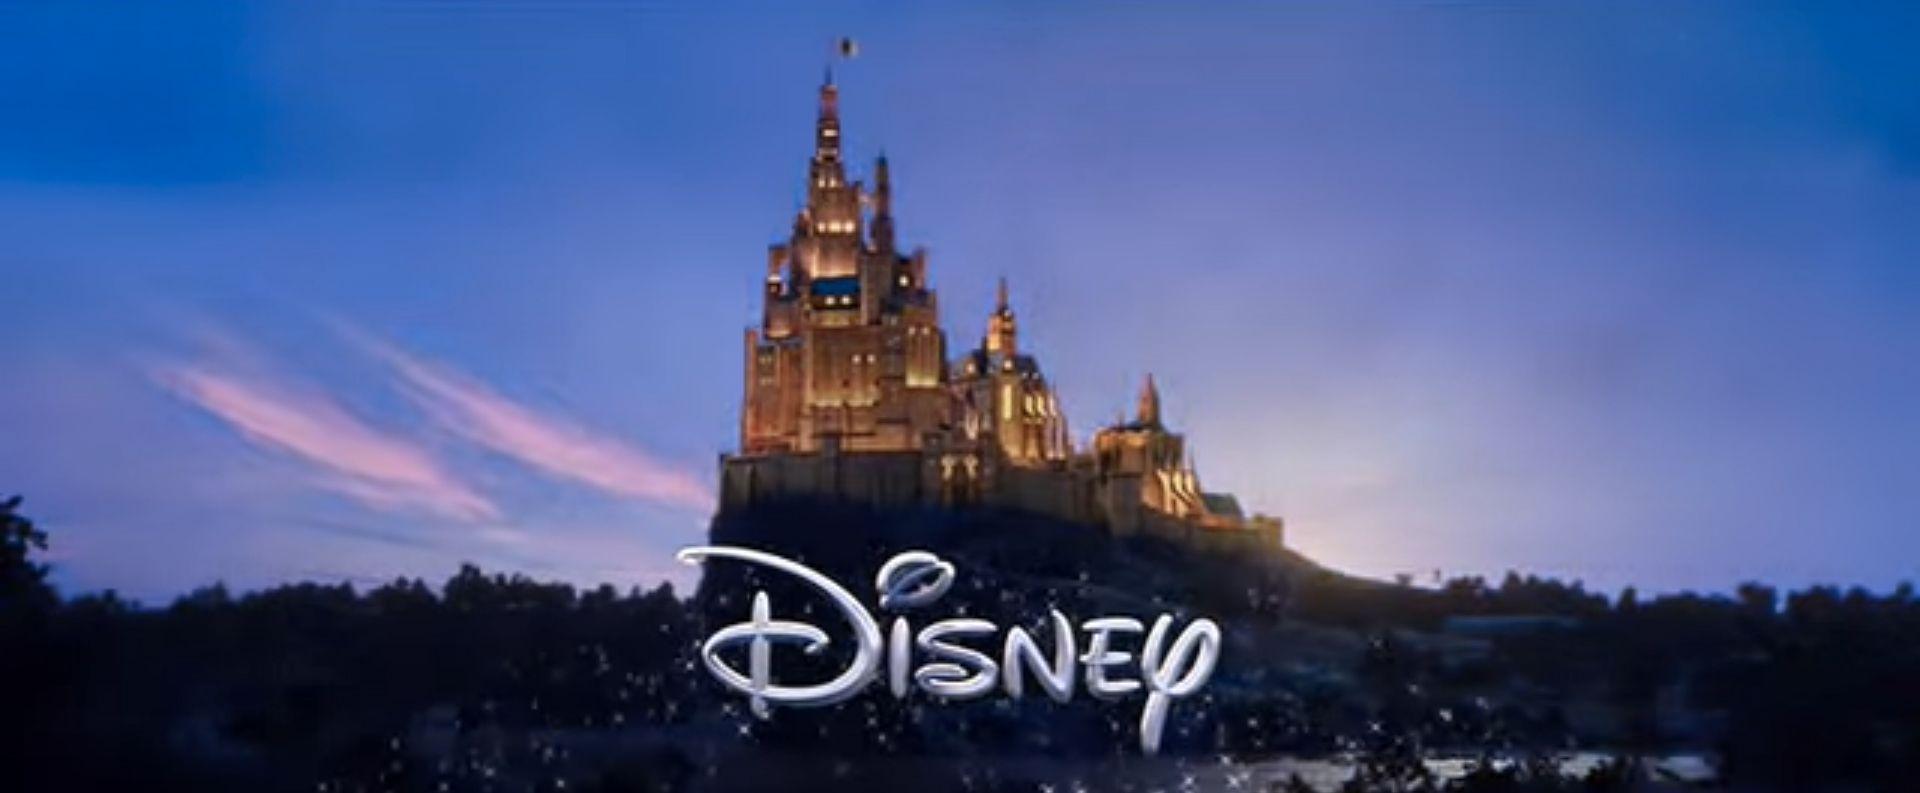 Disney Castle Logo - Why the iconic Walt Disney Picture logo was changed